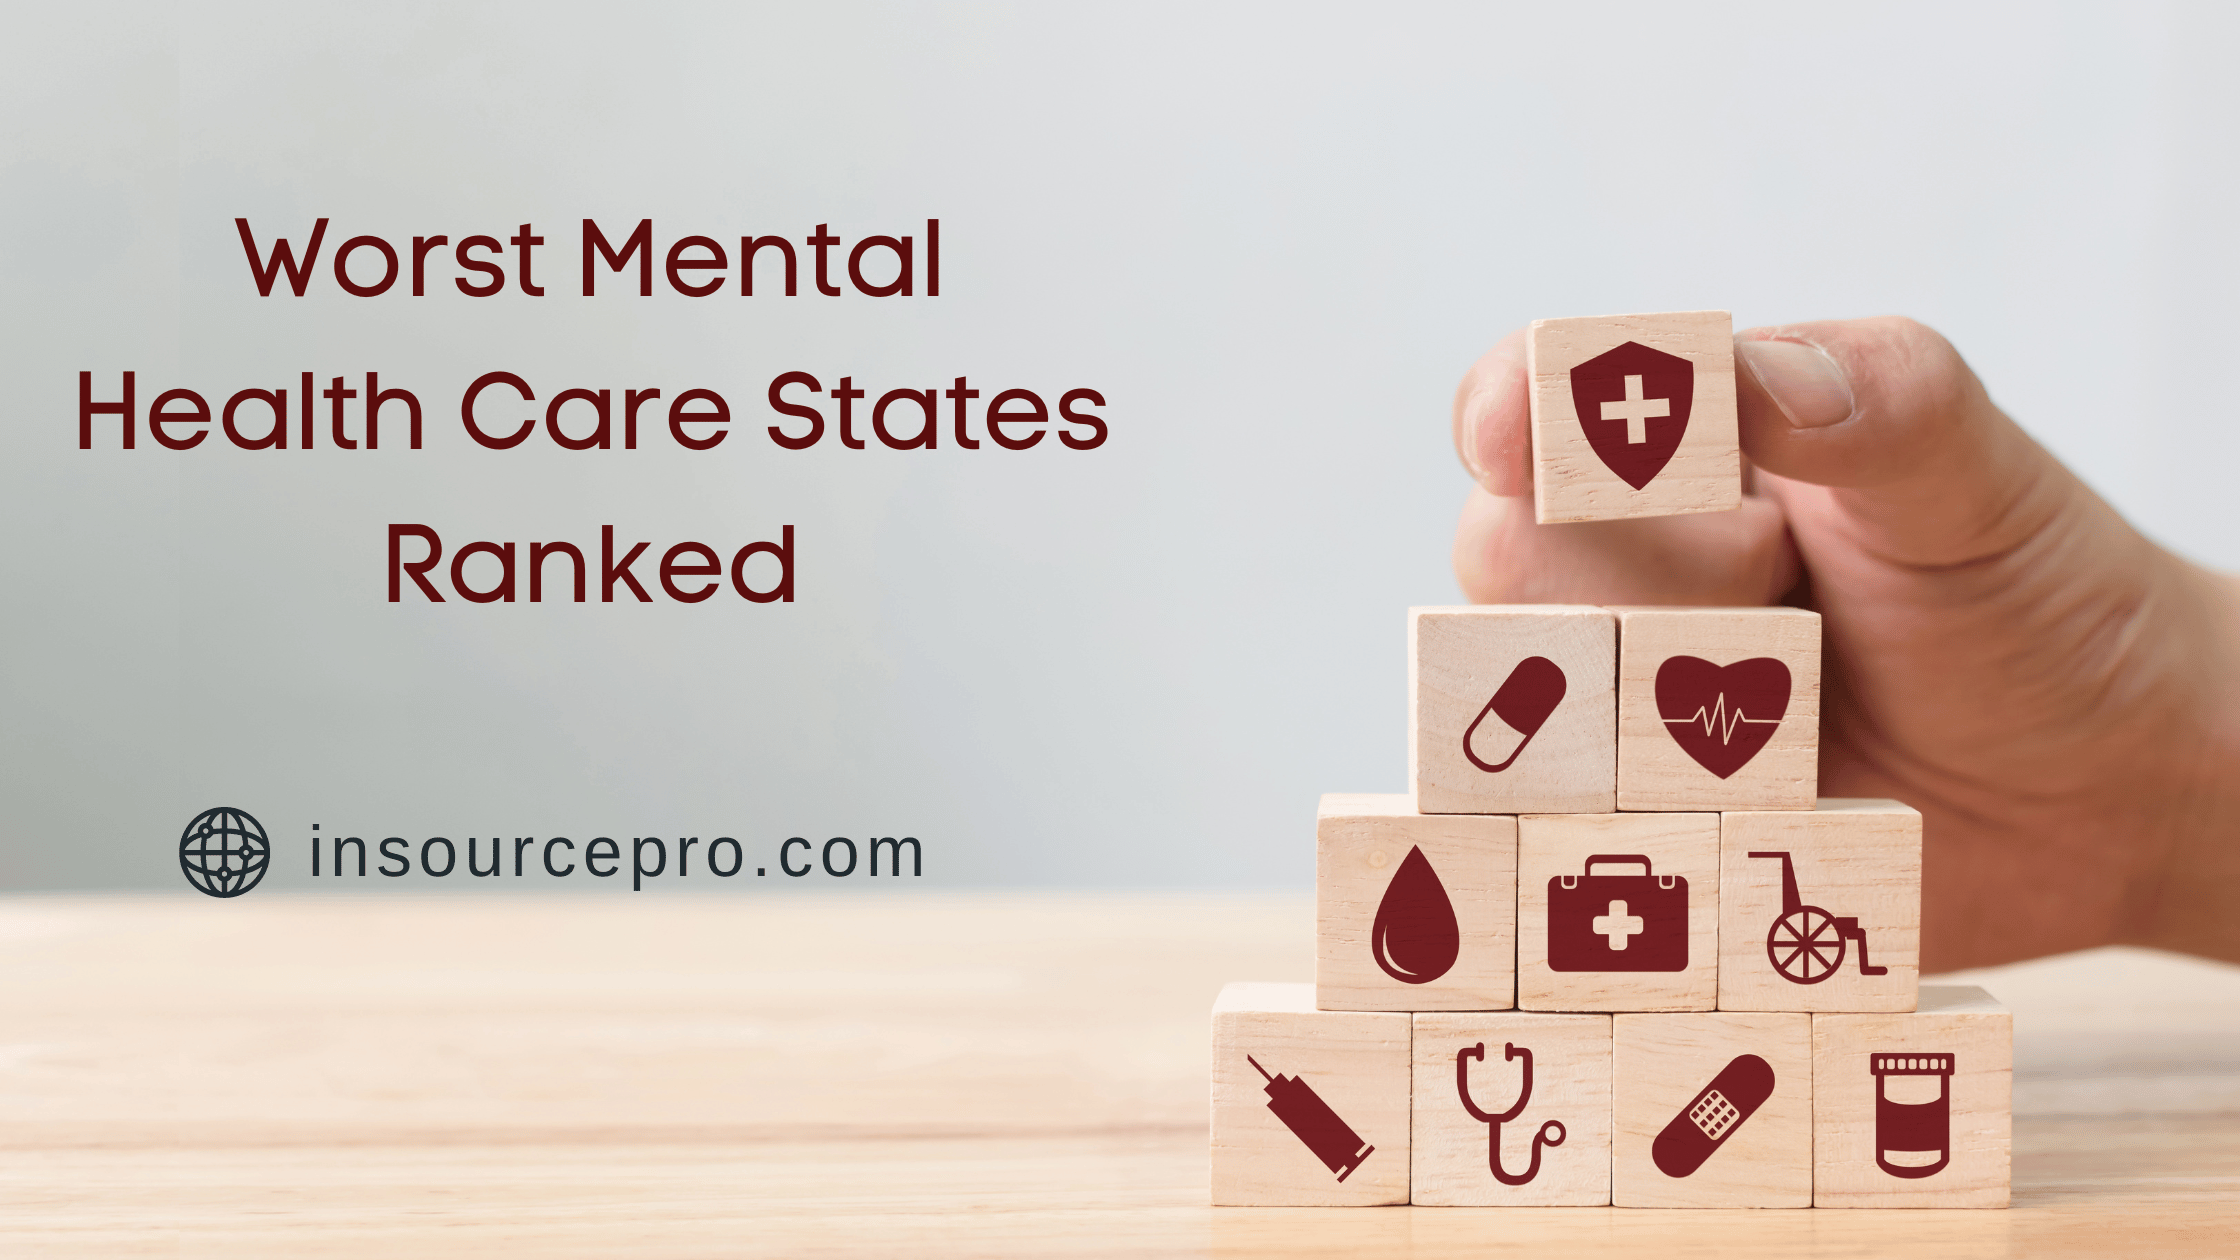 Worst Mental Health Care States Ranked